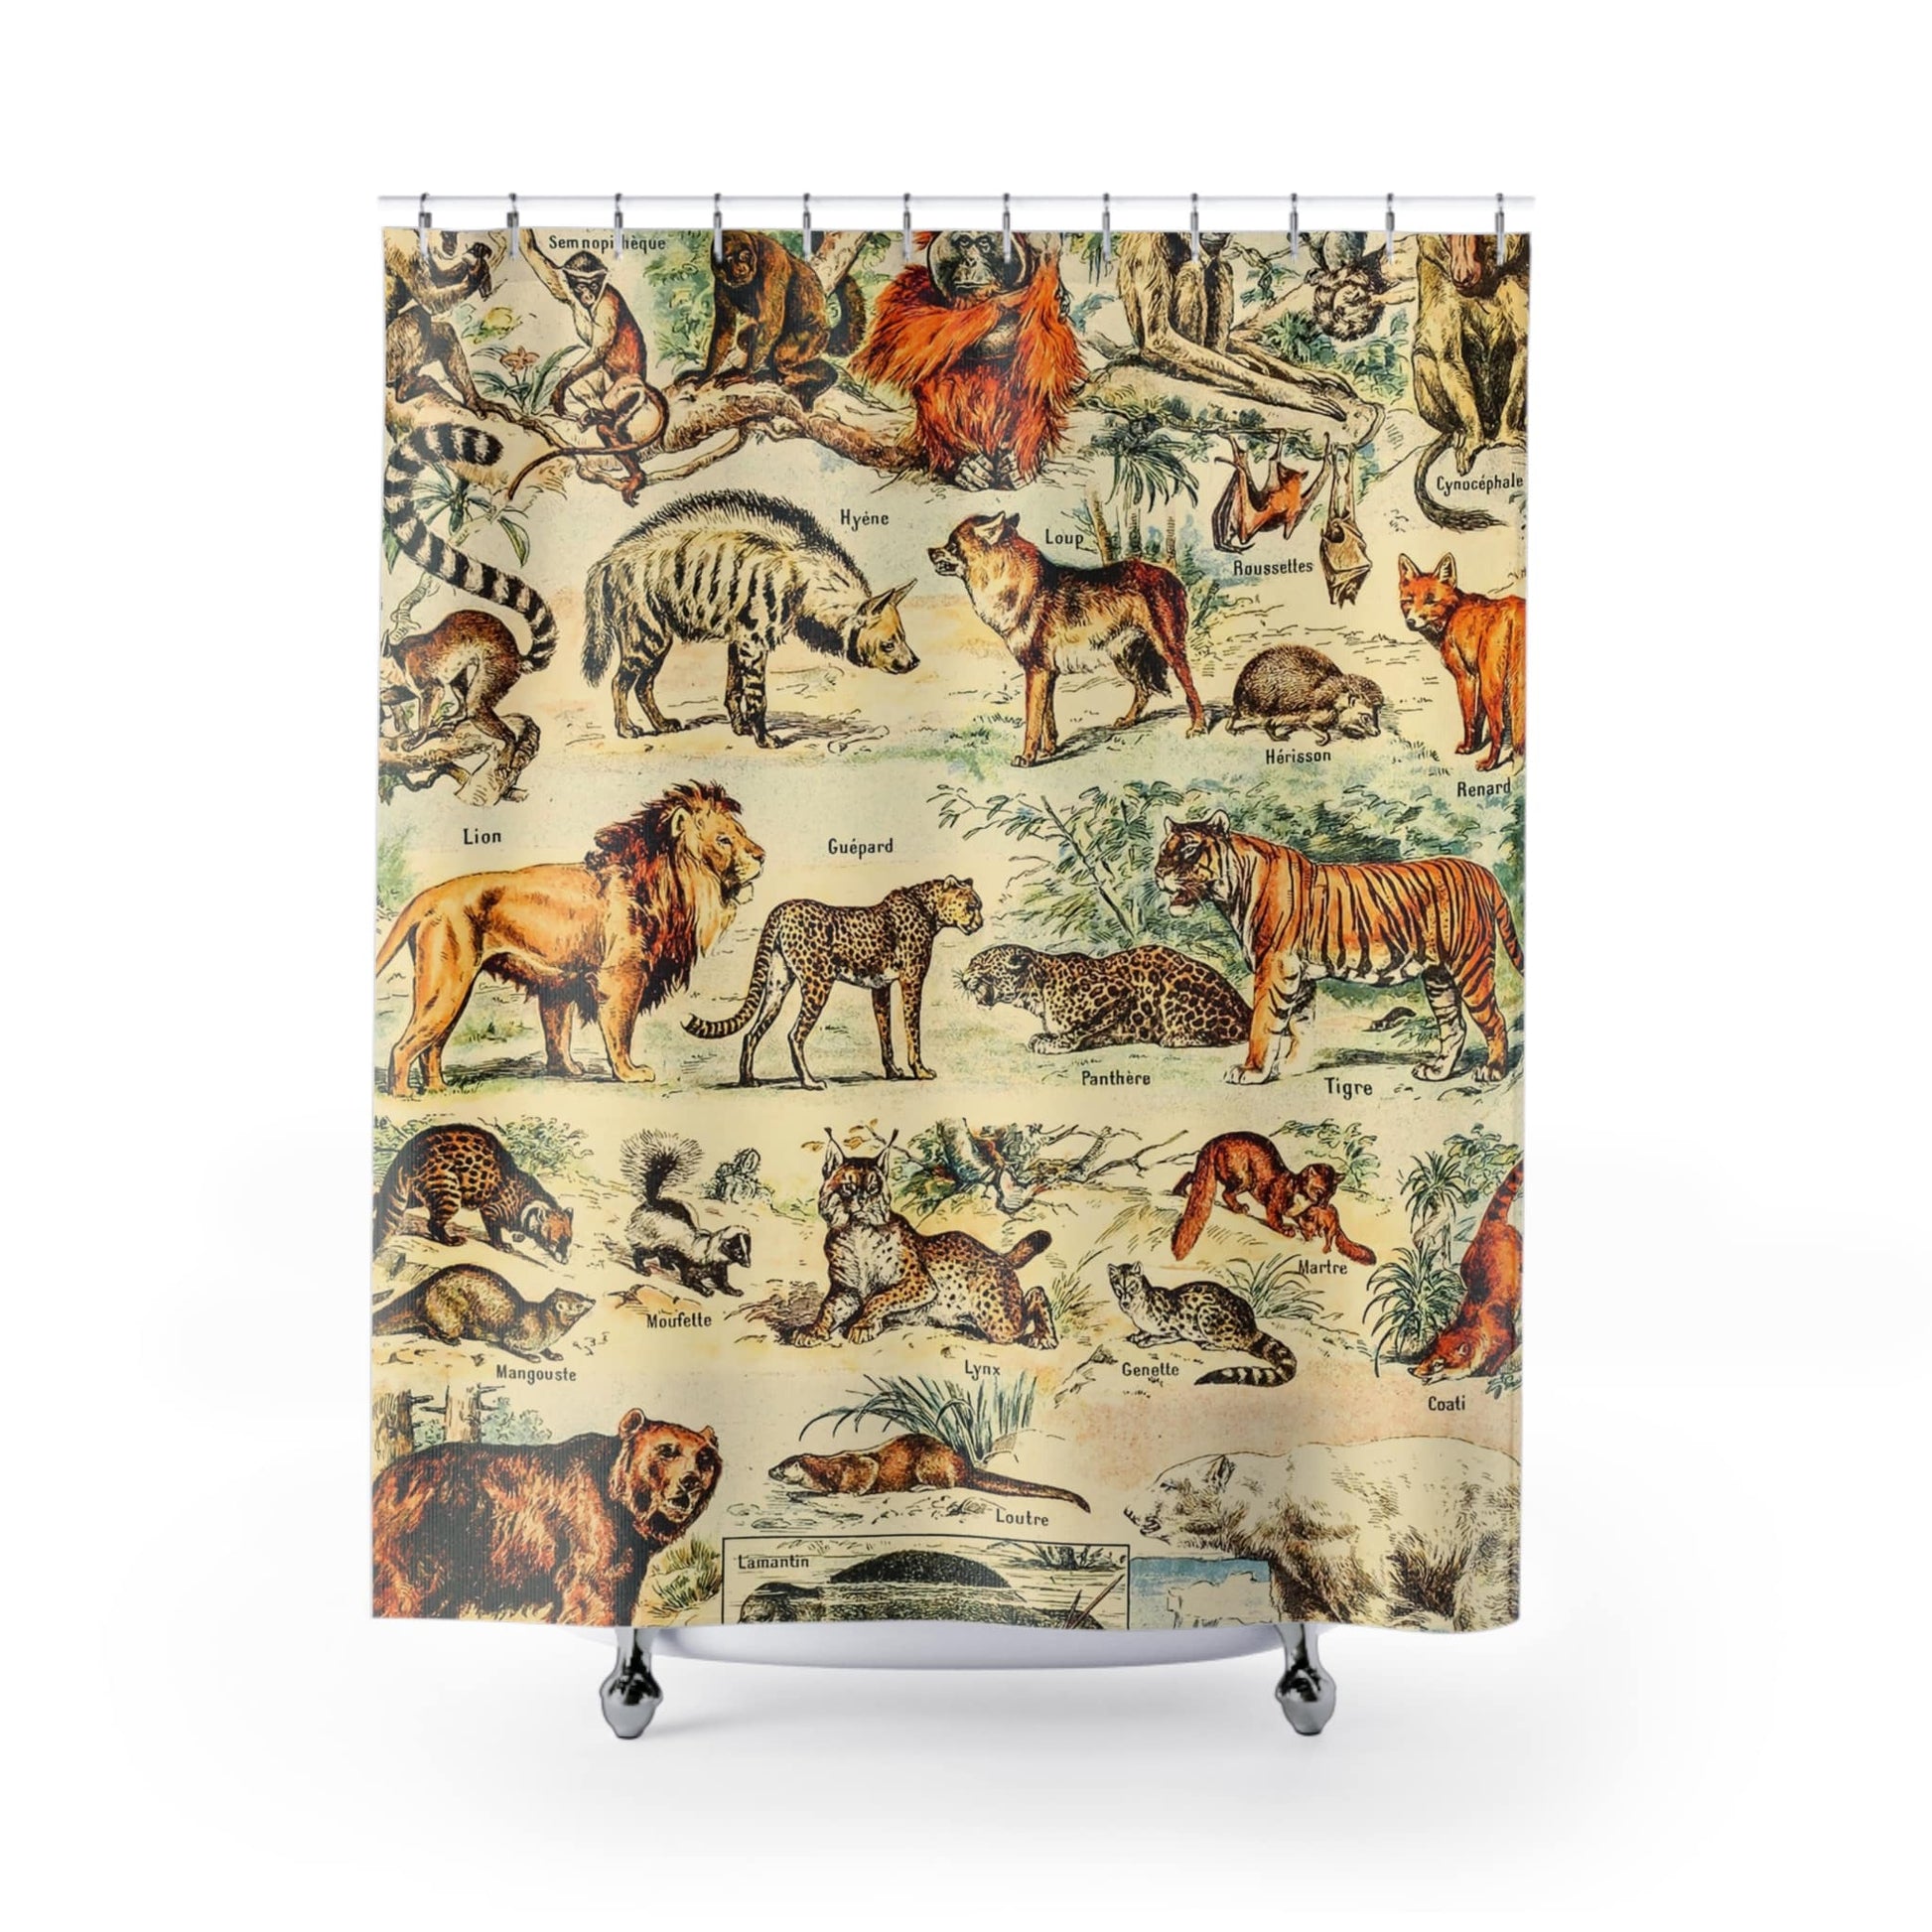 Wild Animals Shower Curtain with mammal chart design, educational bathroom decor featuring detailed mammal illustrations.